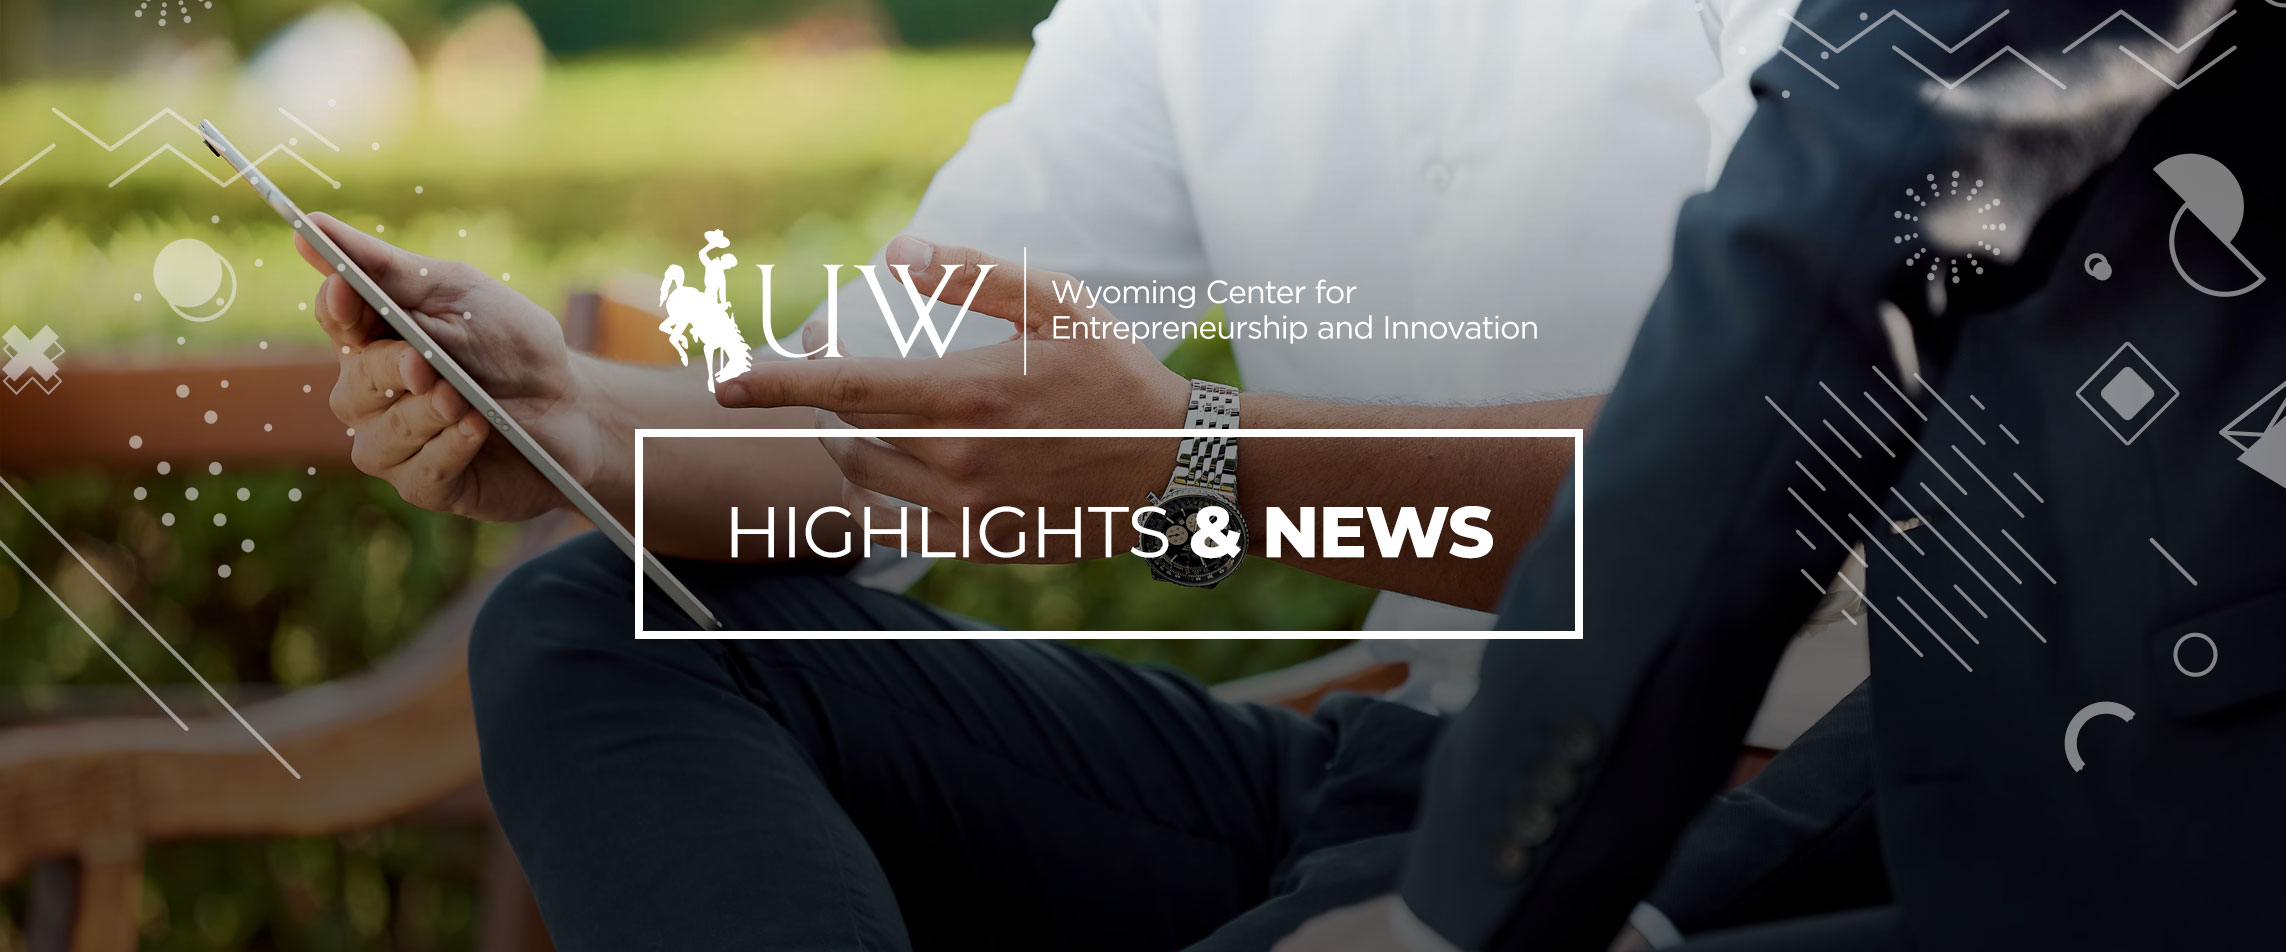 Two people talking with ipad with Highlights & News and University of Wyoming Center for Entrepreneurship & Innovation logo